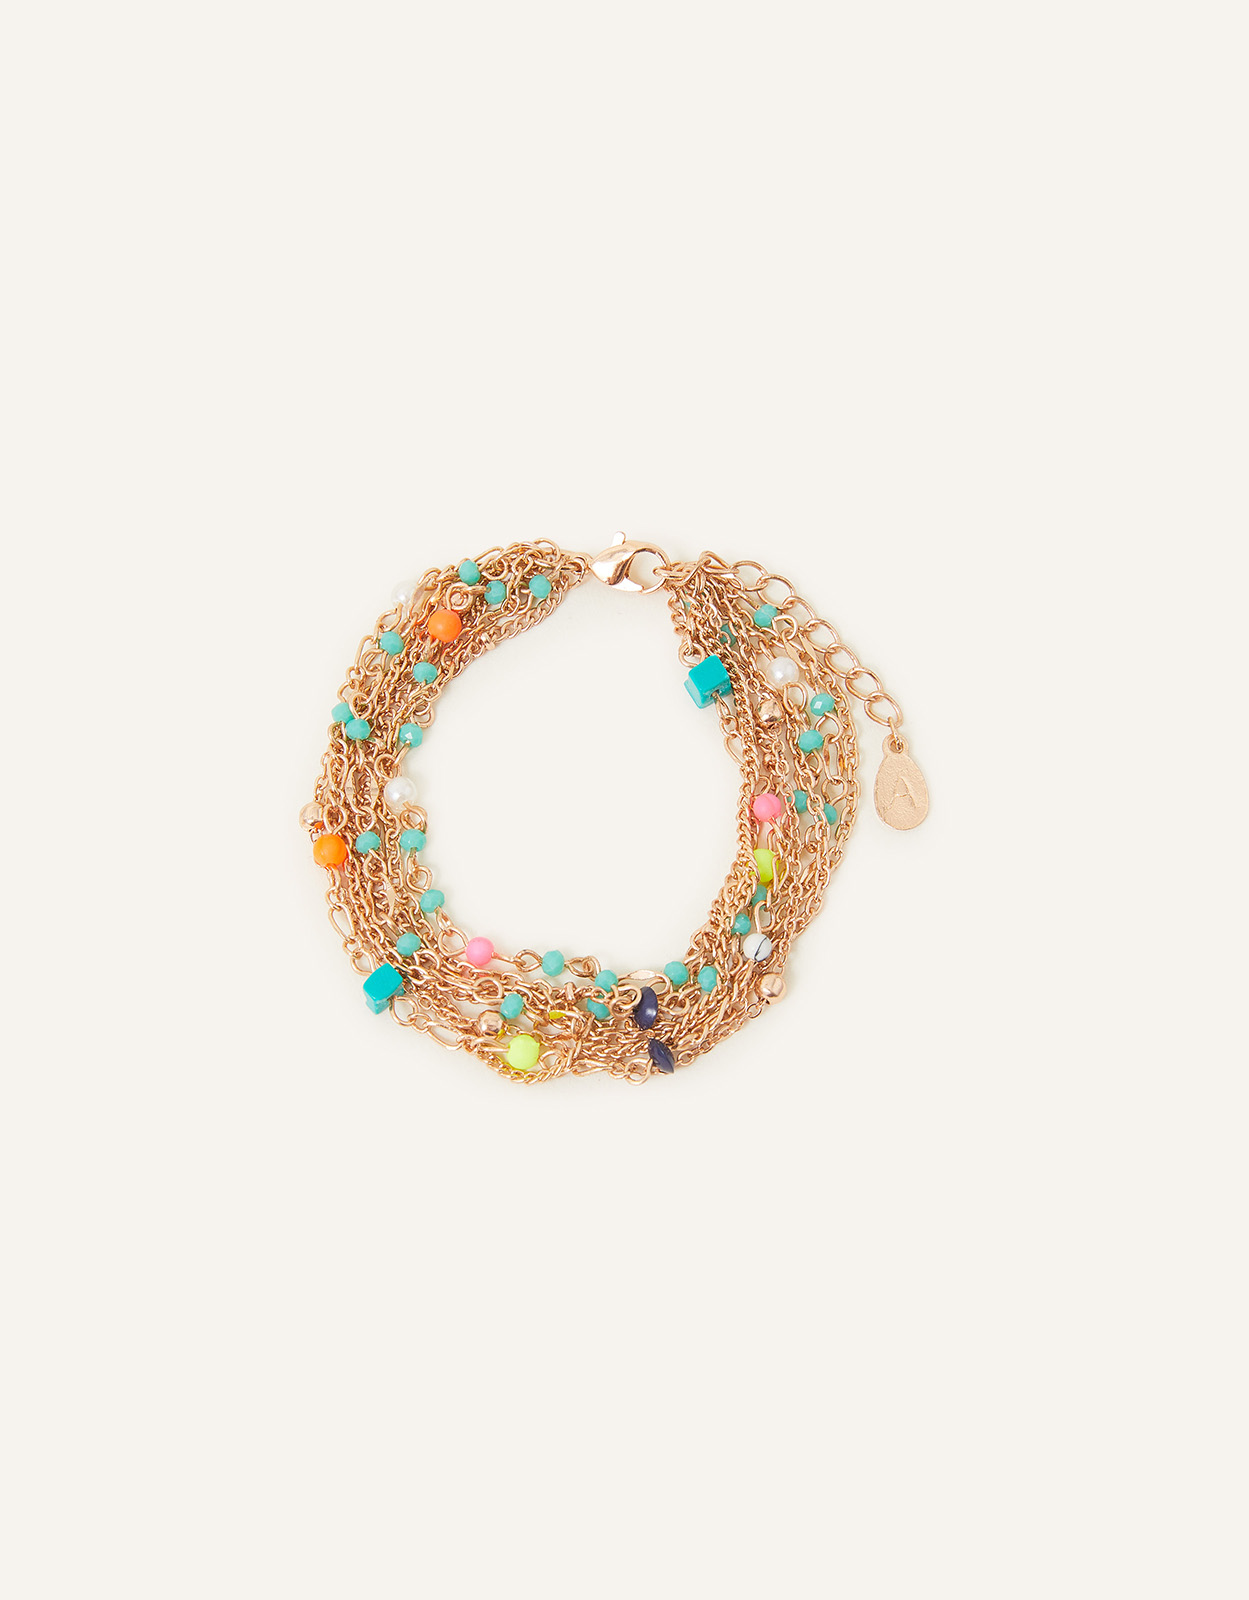 Accessorize Women's Gold, Orange and Green Brass Beaded Chain Clasp Bracelet, Size: 18cm